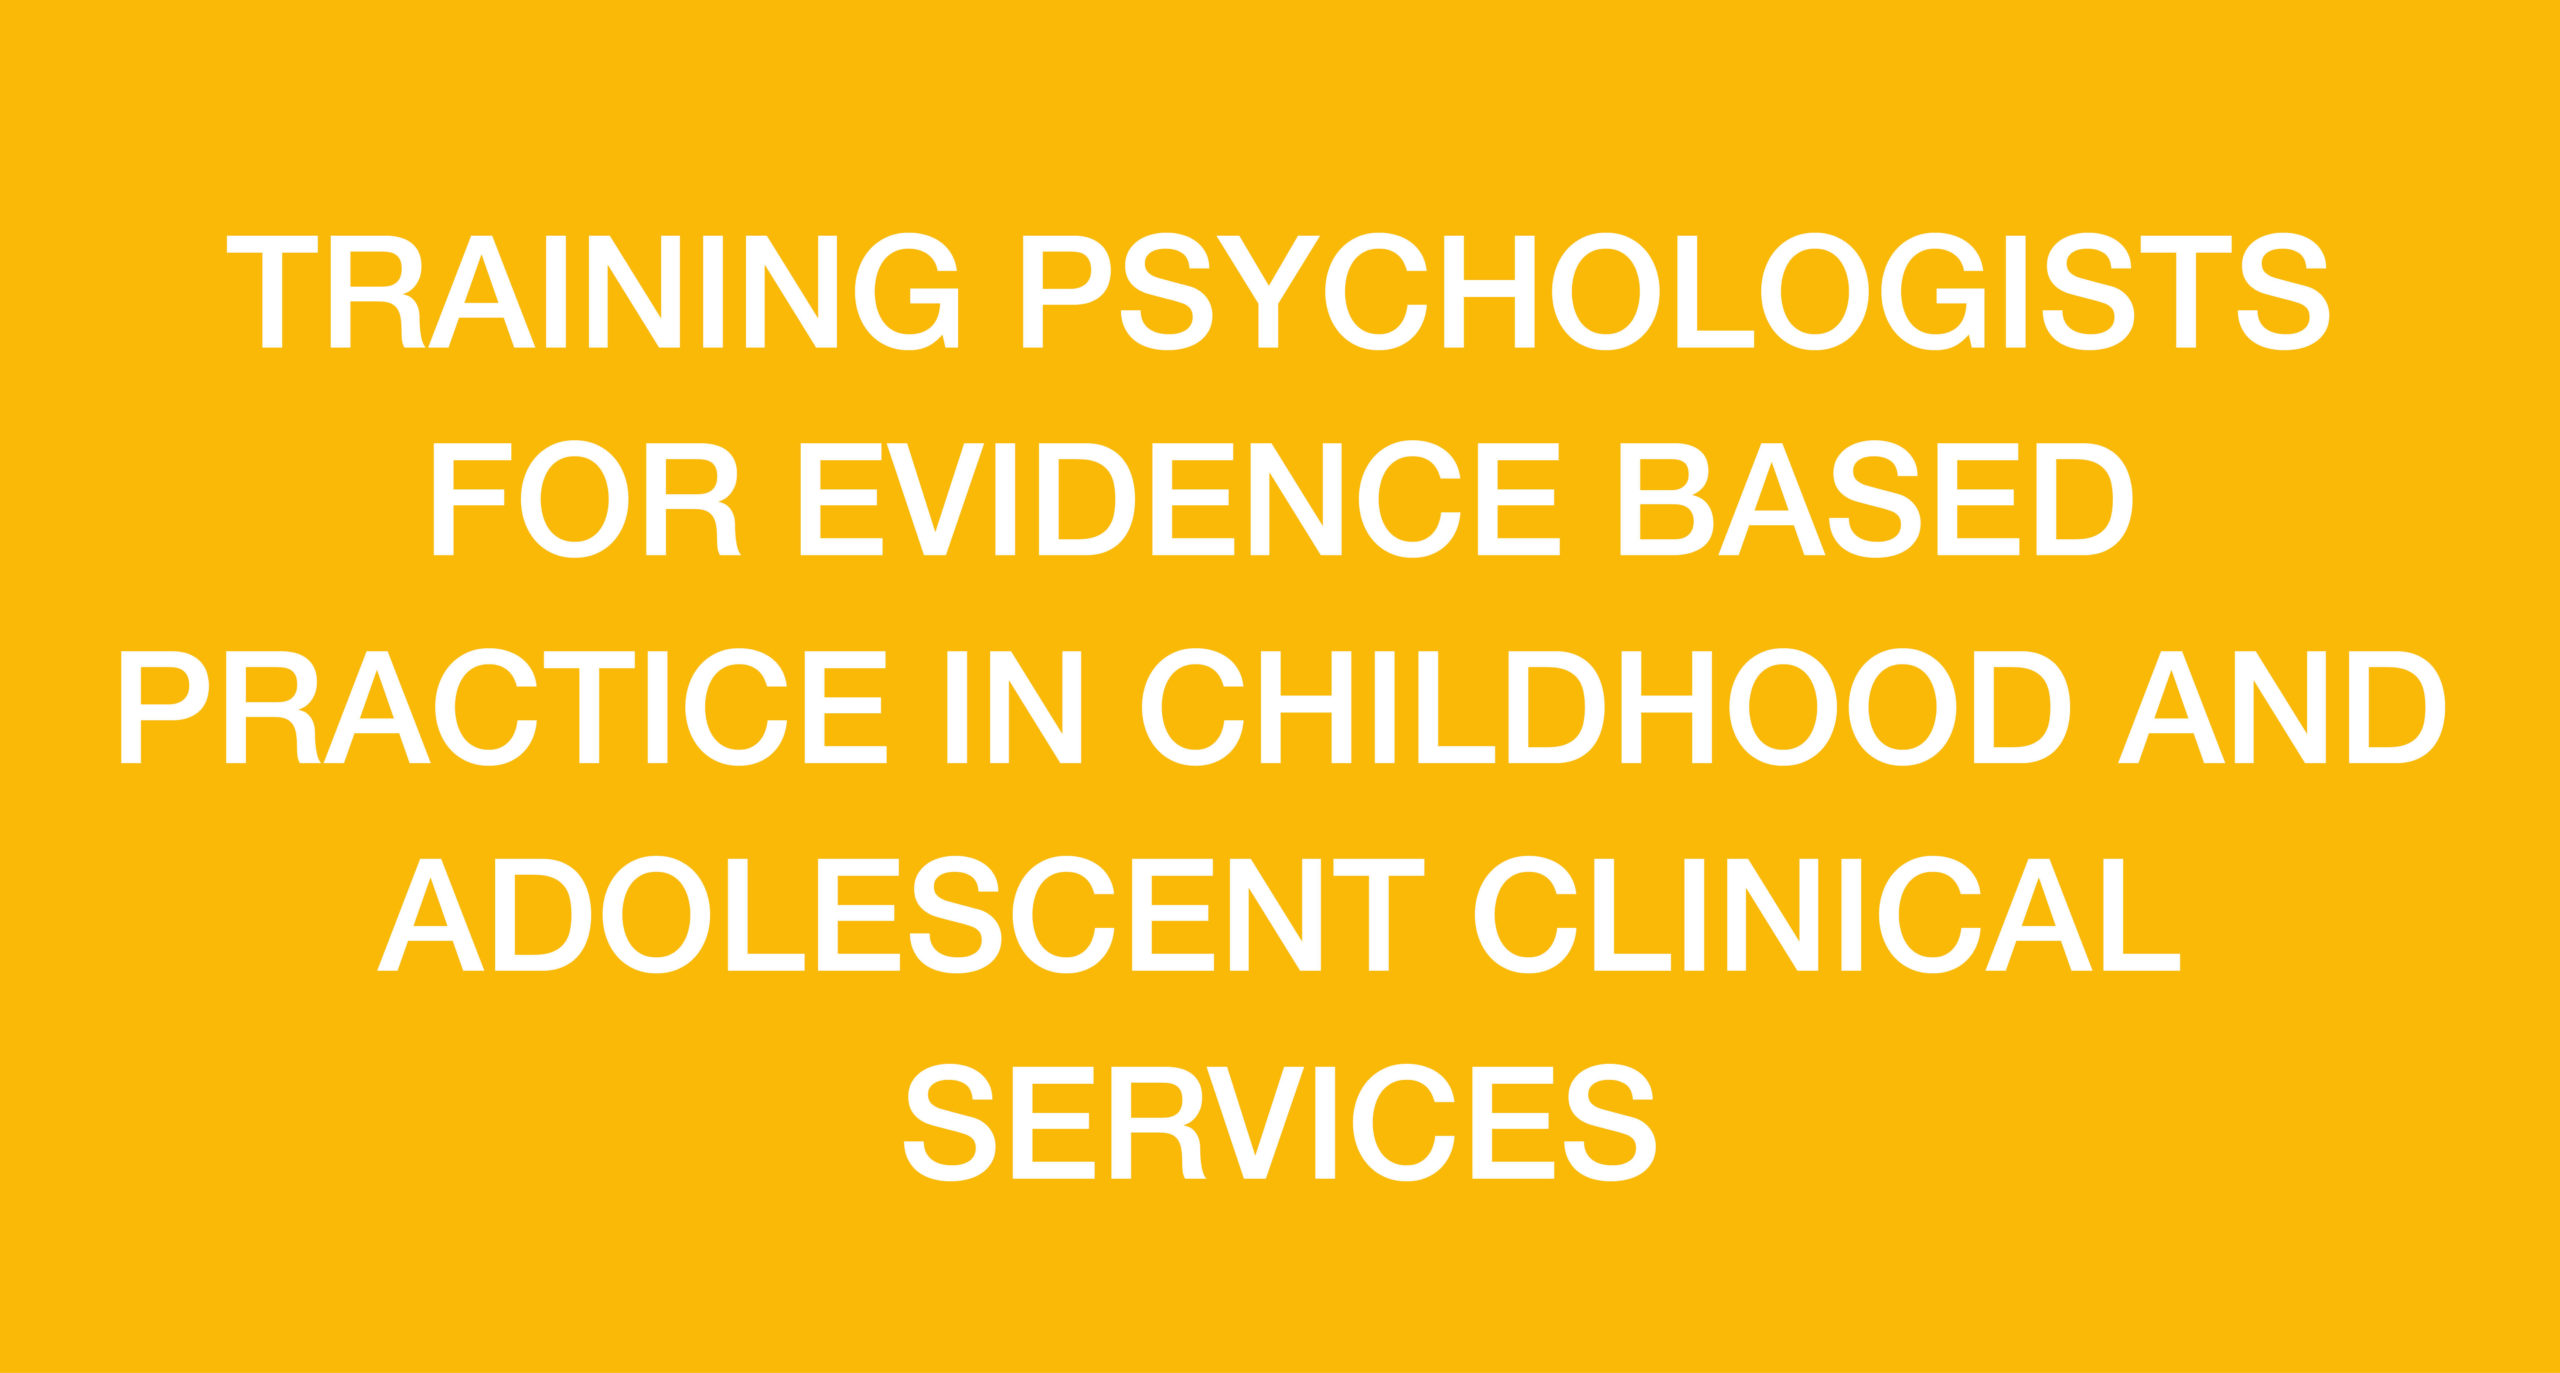 Al momento stai visualizzando TRAINING PSYCHOLOGISTS FOR EVIDENCE BASED PRACTICE IN CHILDHOOD AND ADOLESCENT CLINICAL SERVICES